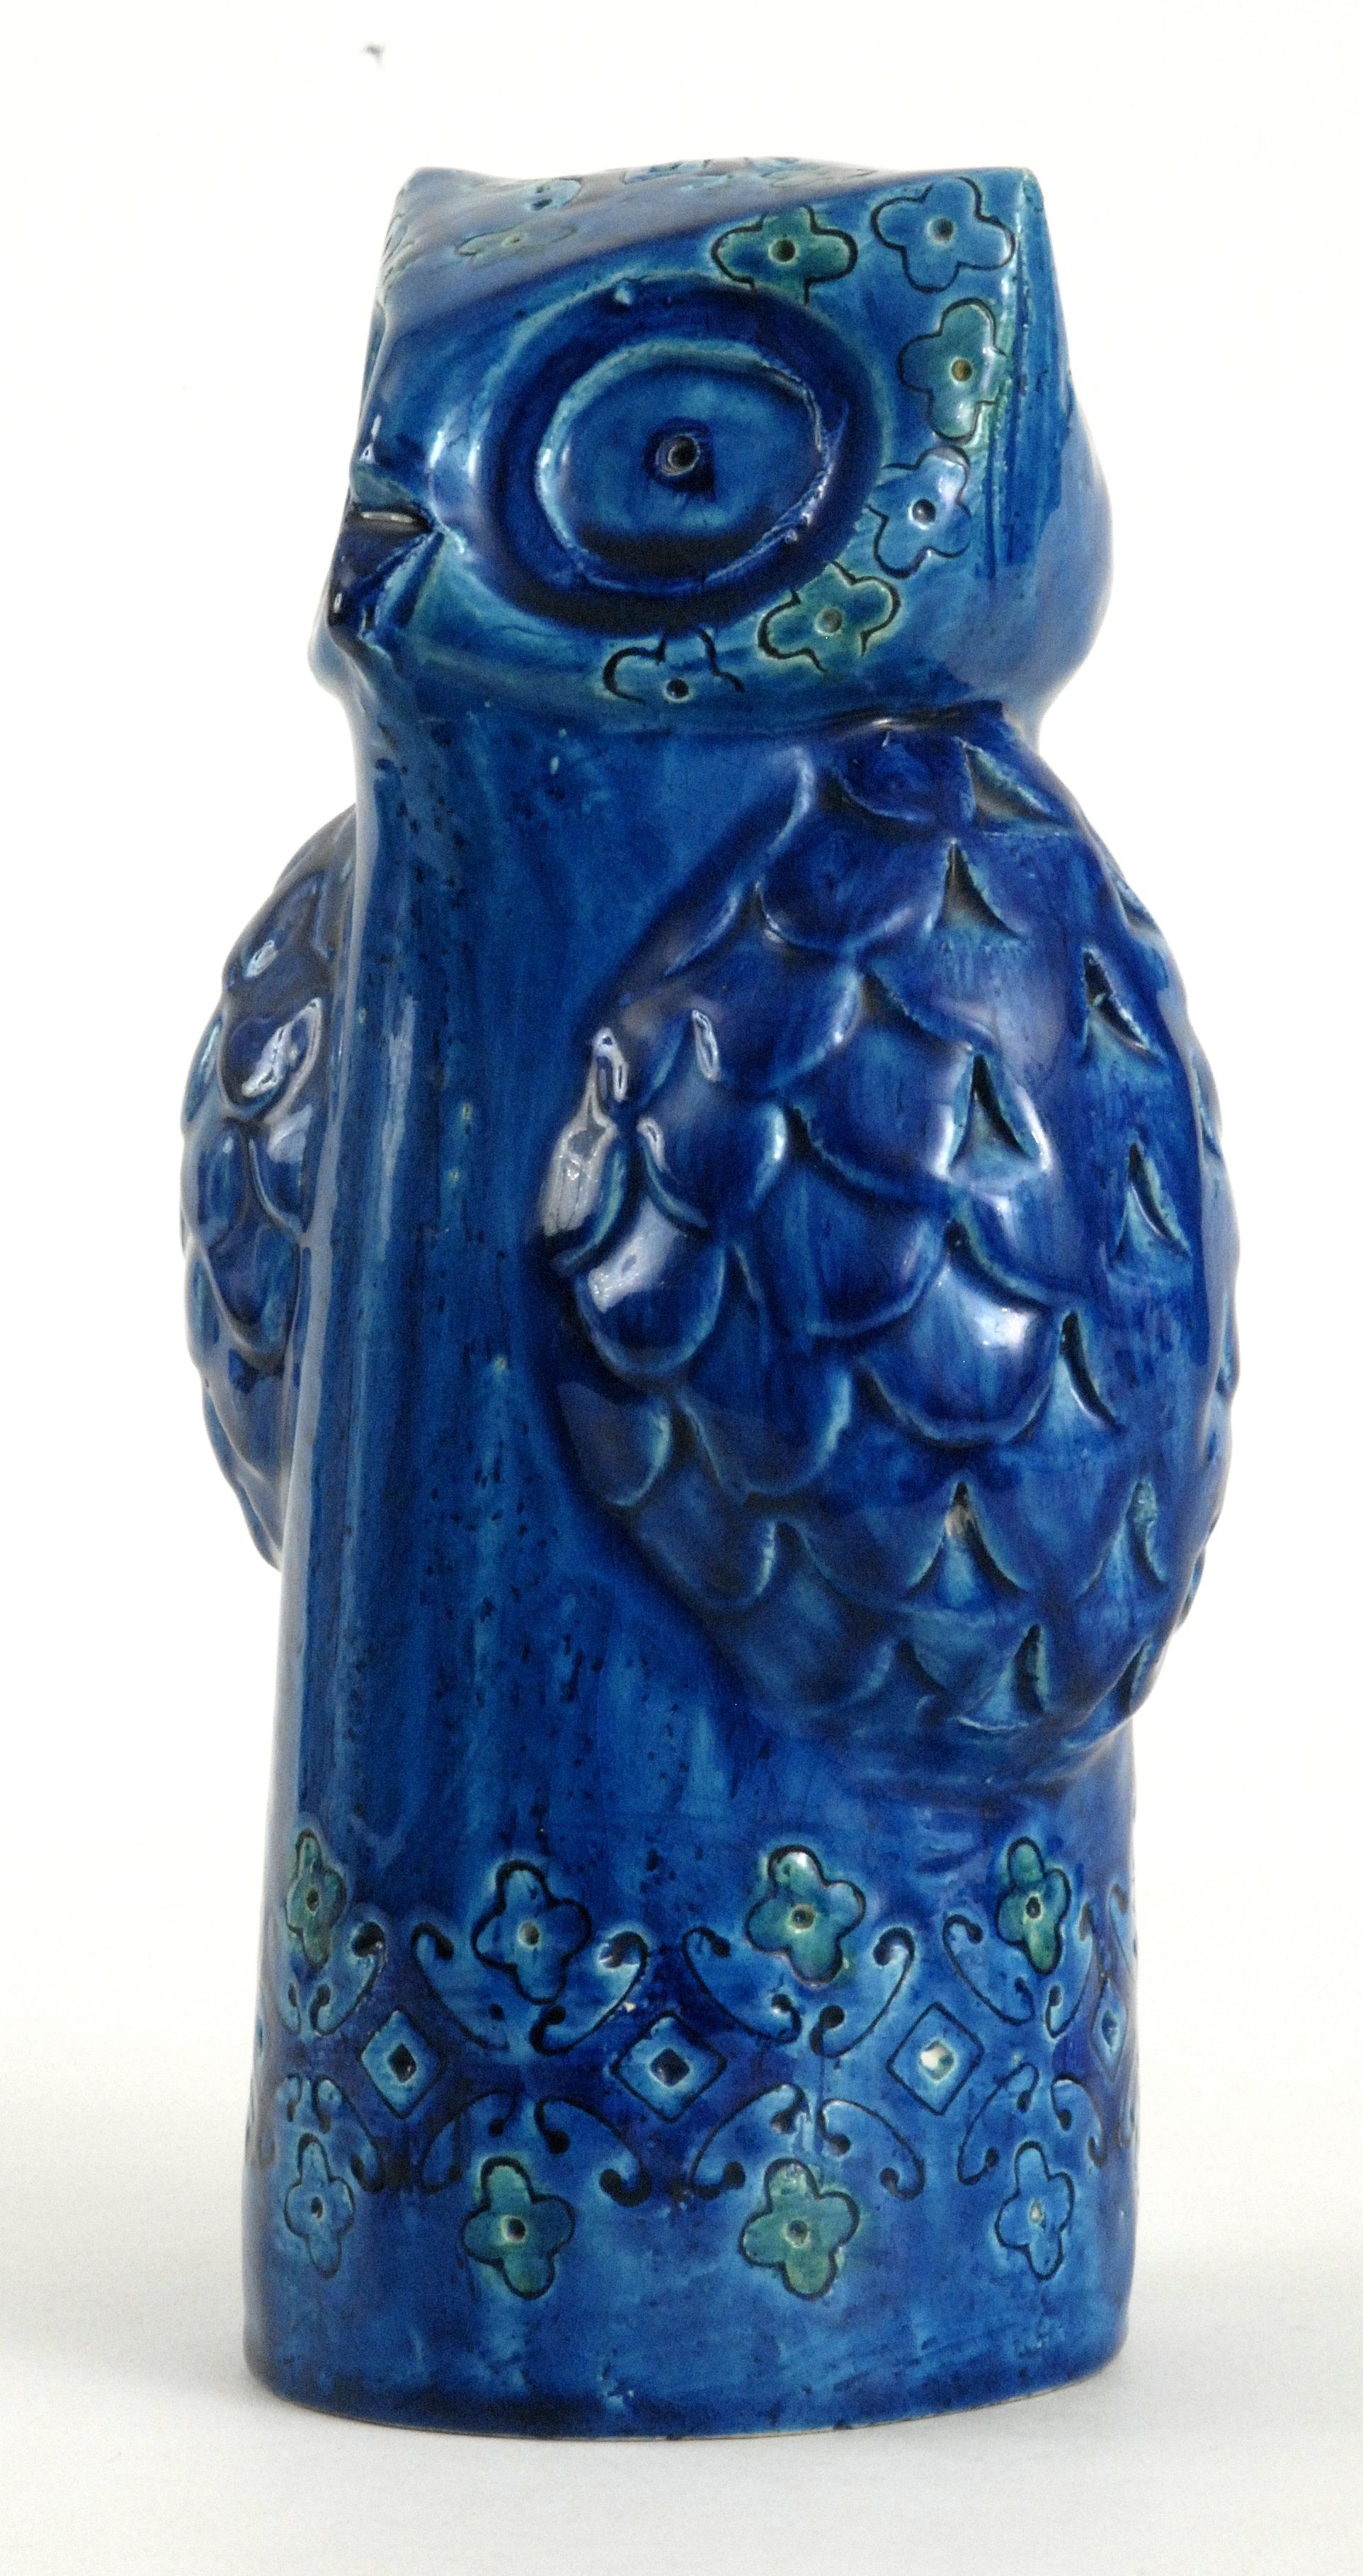 A brilliant bright blue owl with the impressed pattern from the Spagnolo series. In brilliant condition.